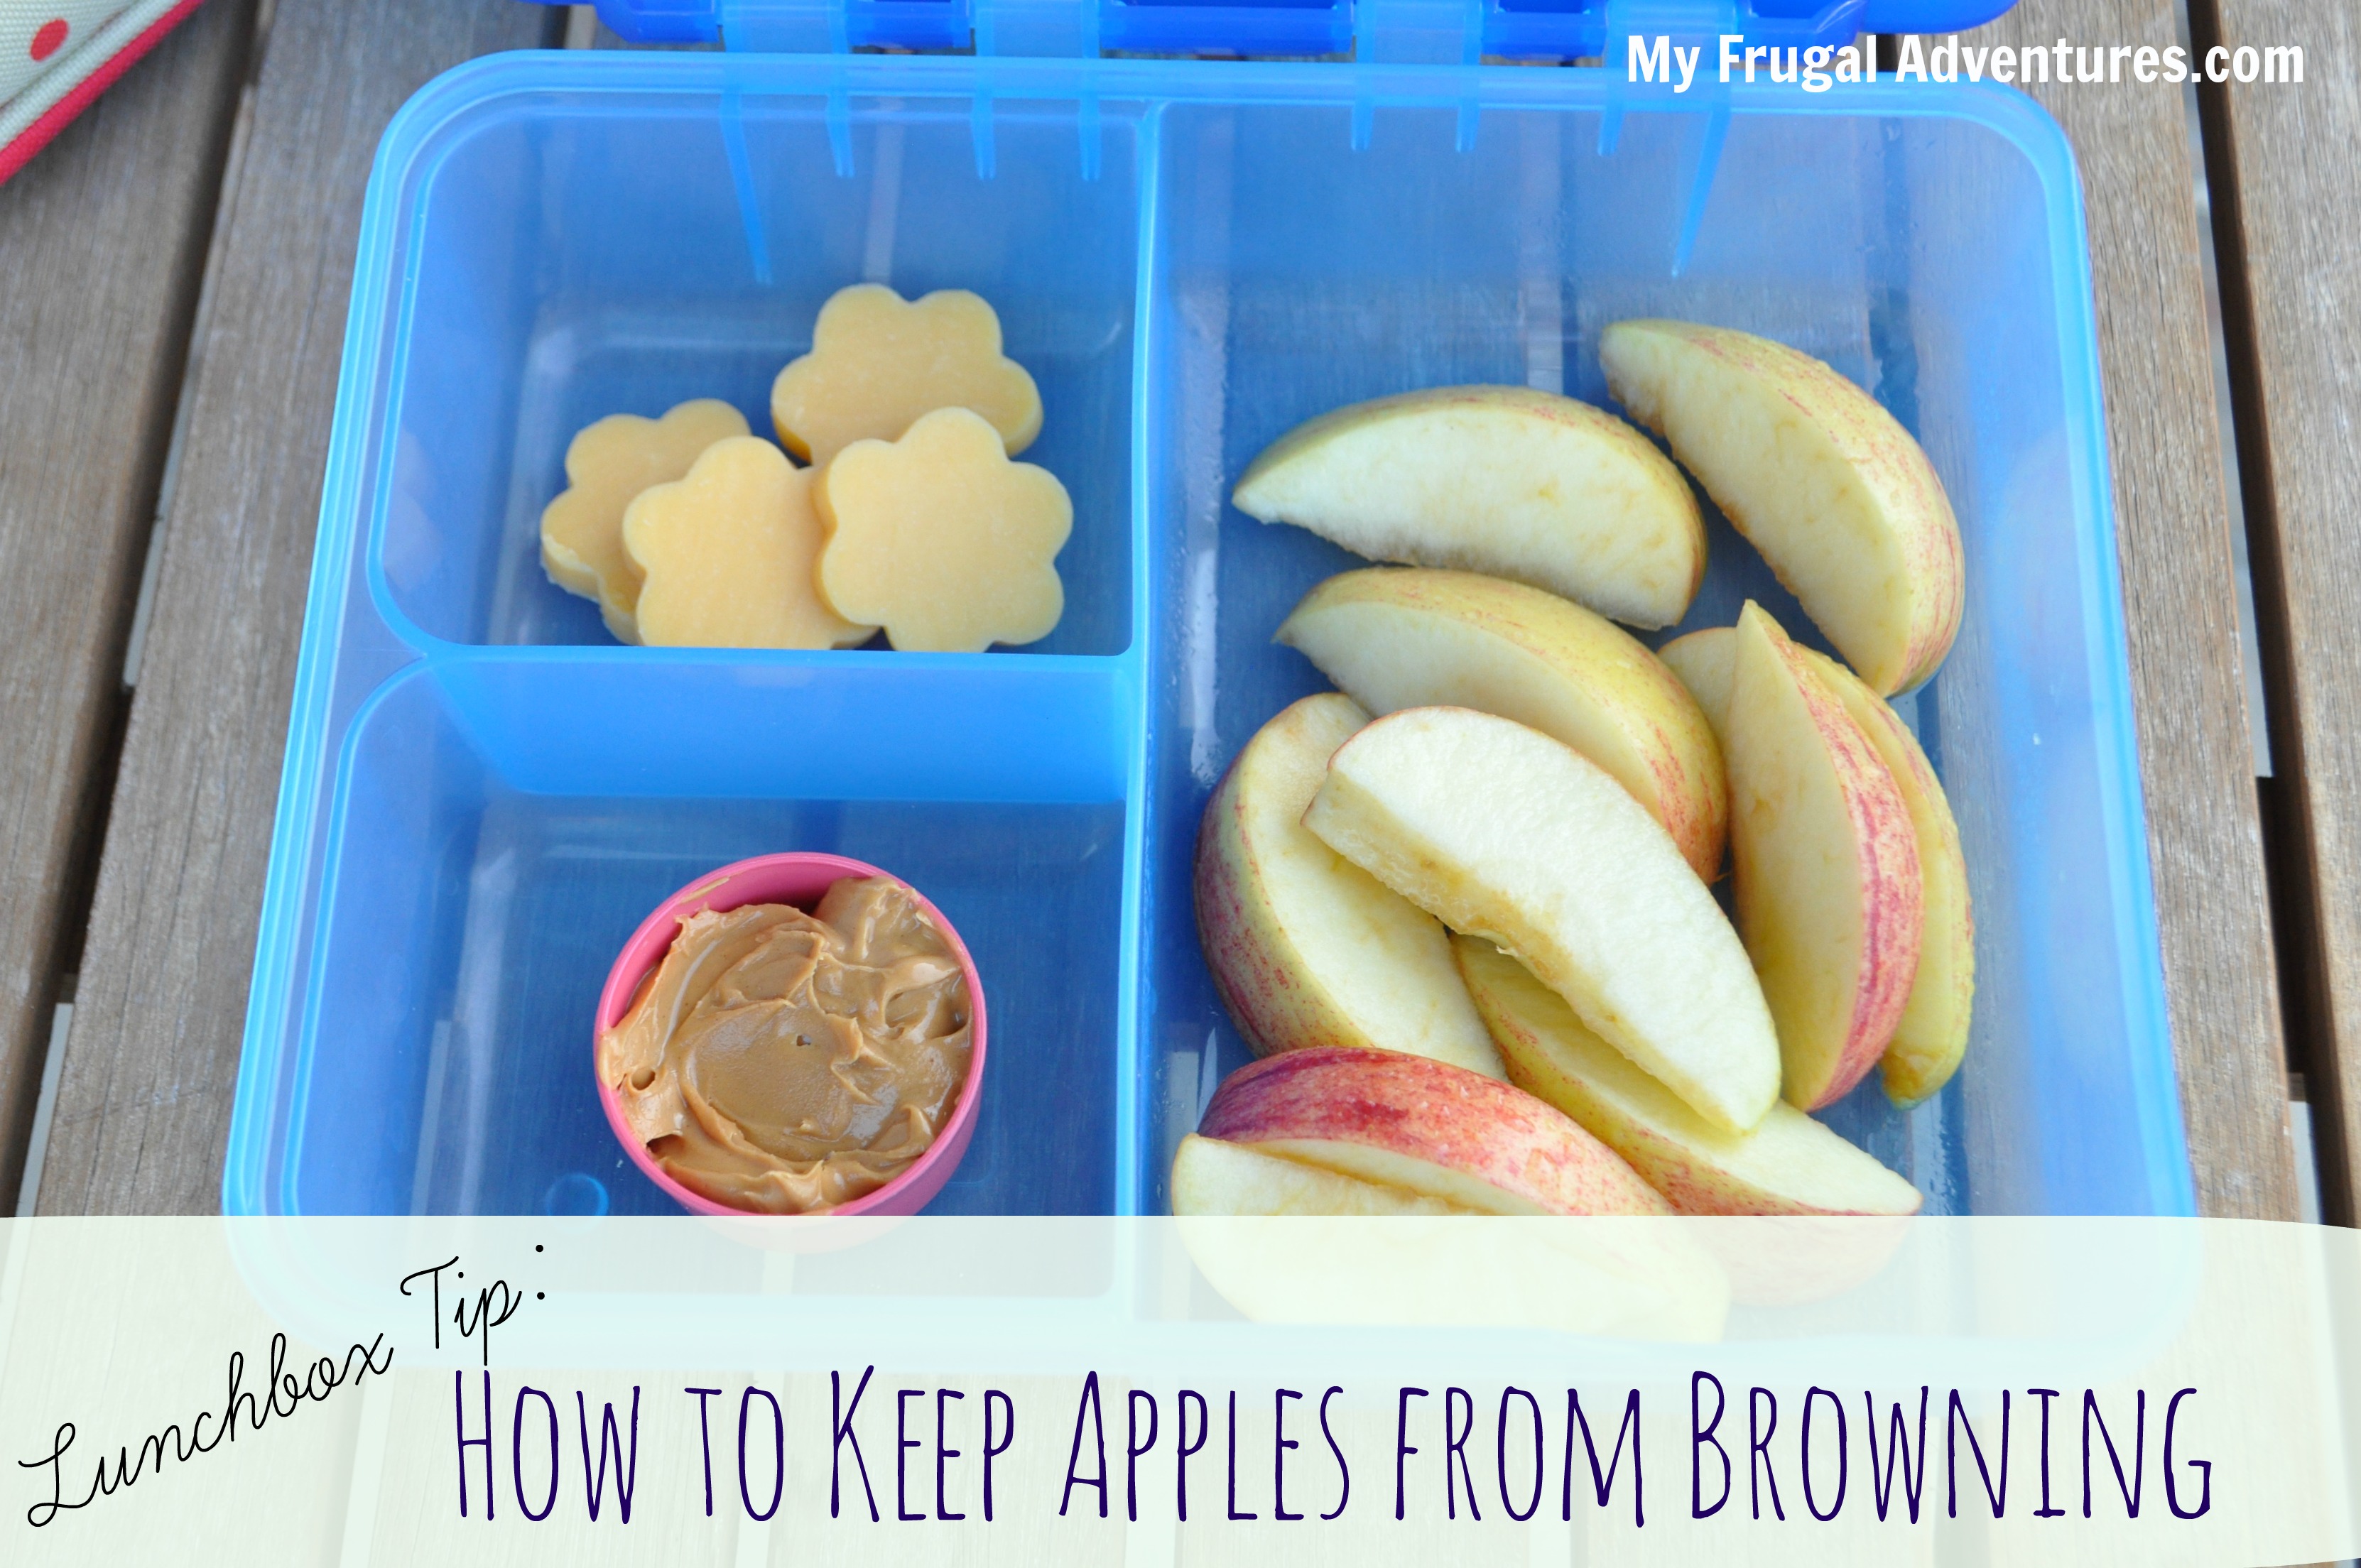 https://myfrugaladventures.com/wp-content/uploads/2012/07/how-to-keep-apples-from-turning-brown.jpg